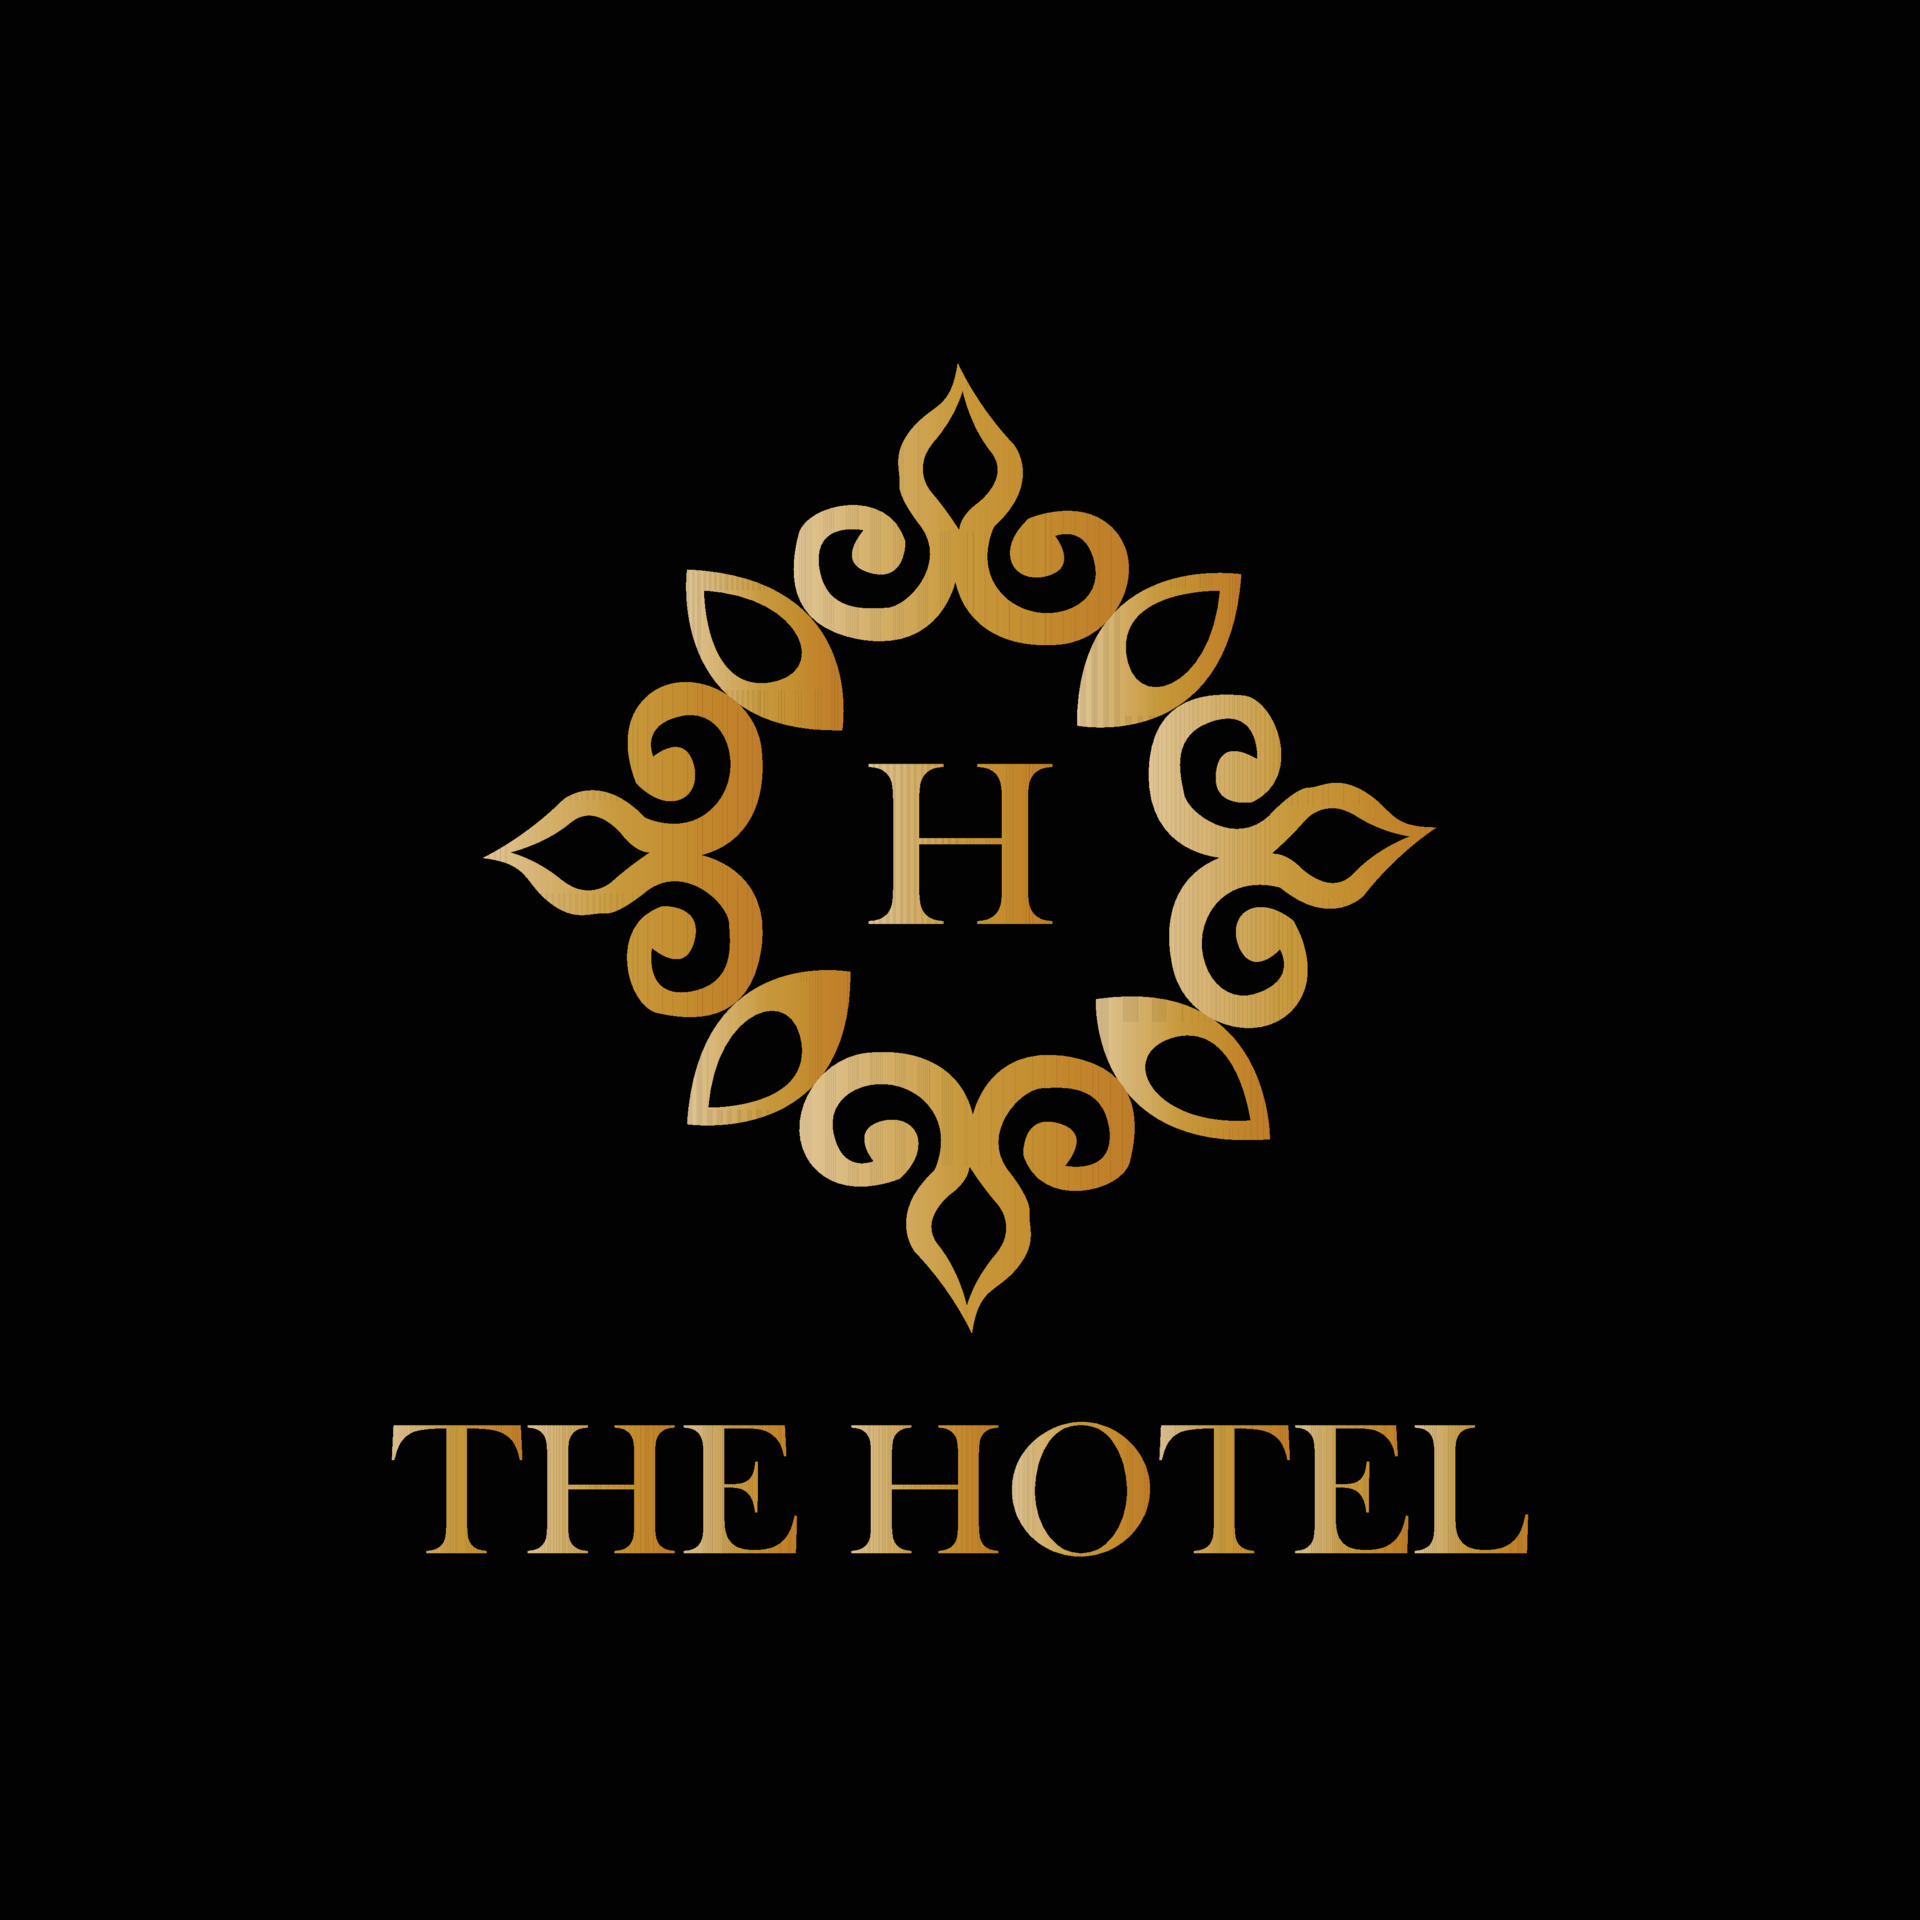 the-hotel-logo-design-by-h-the-hotel-fre